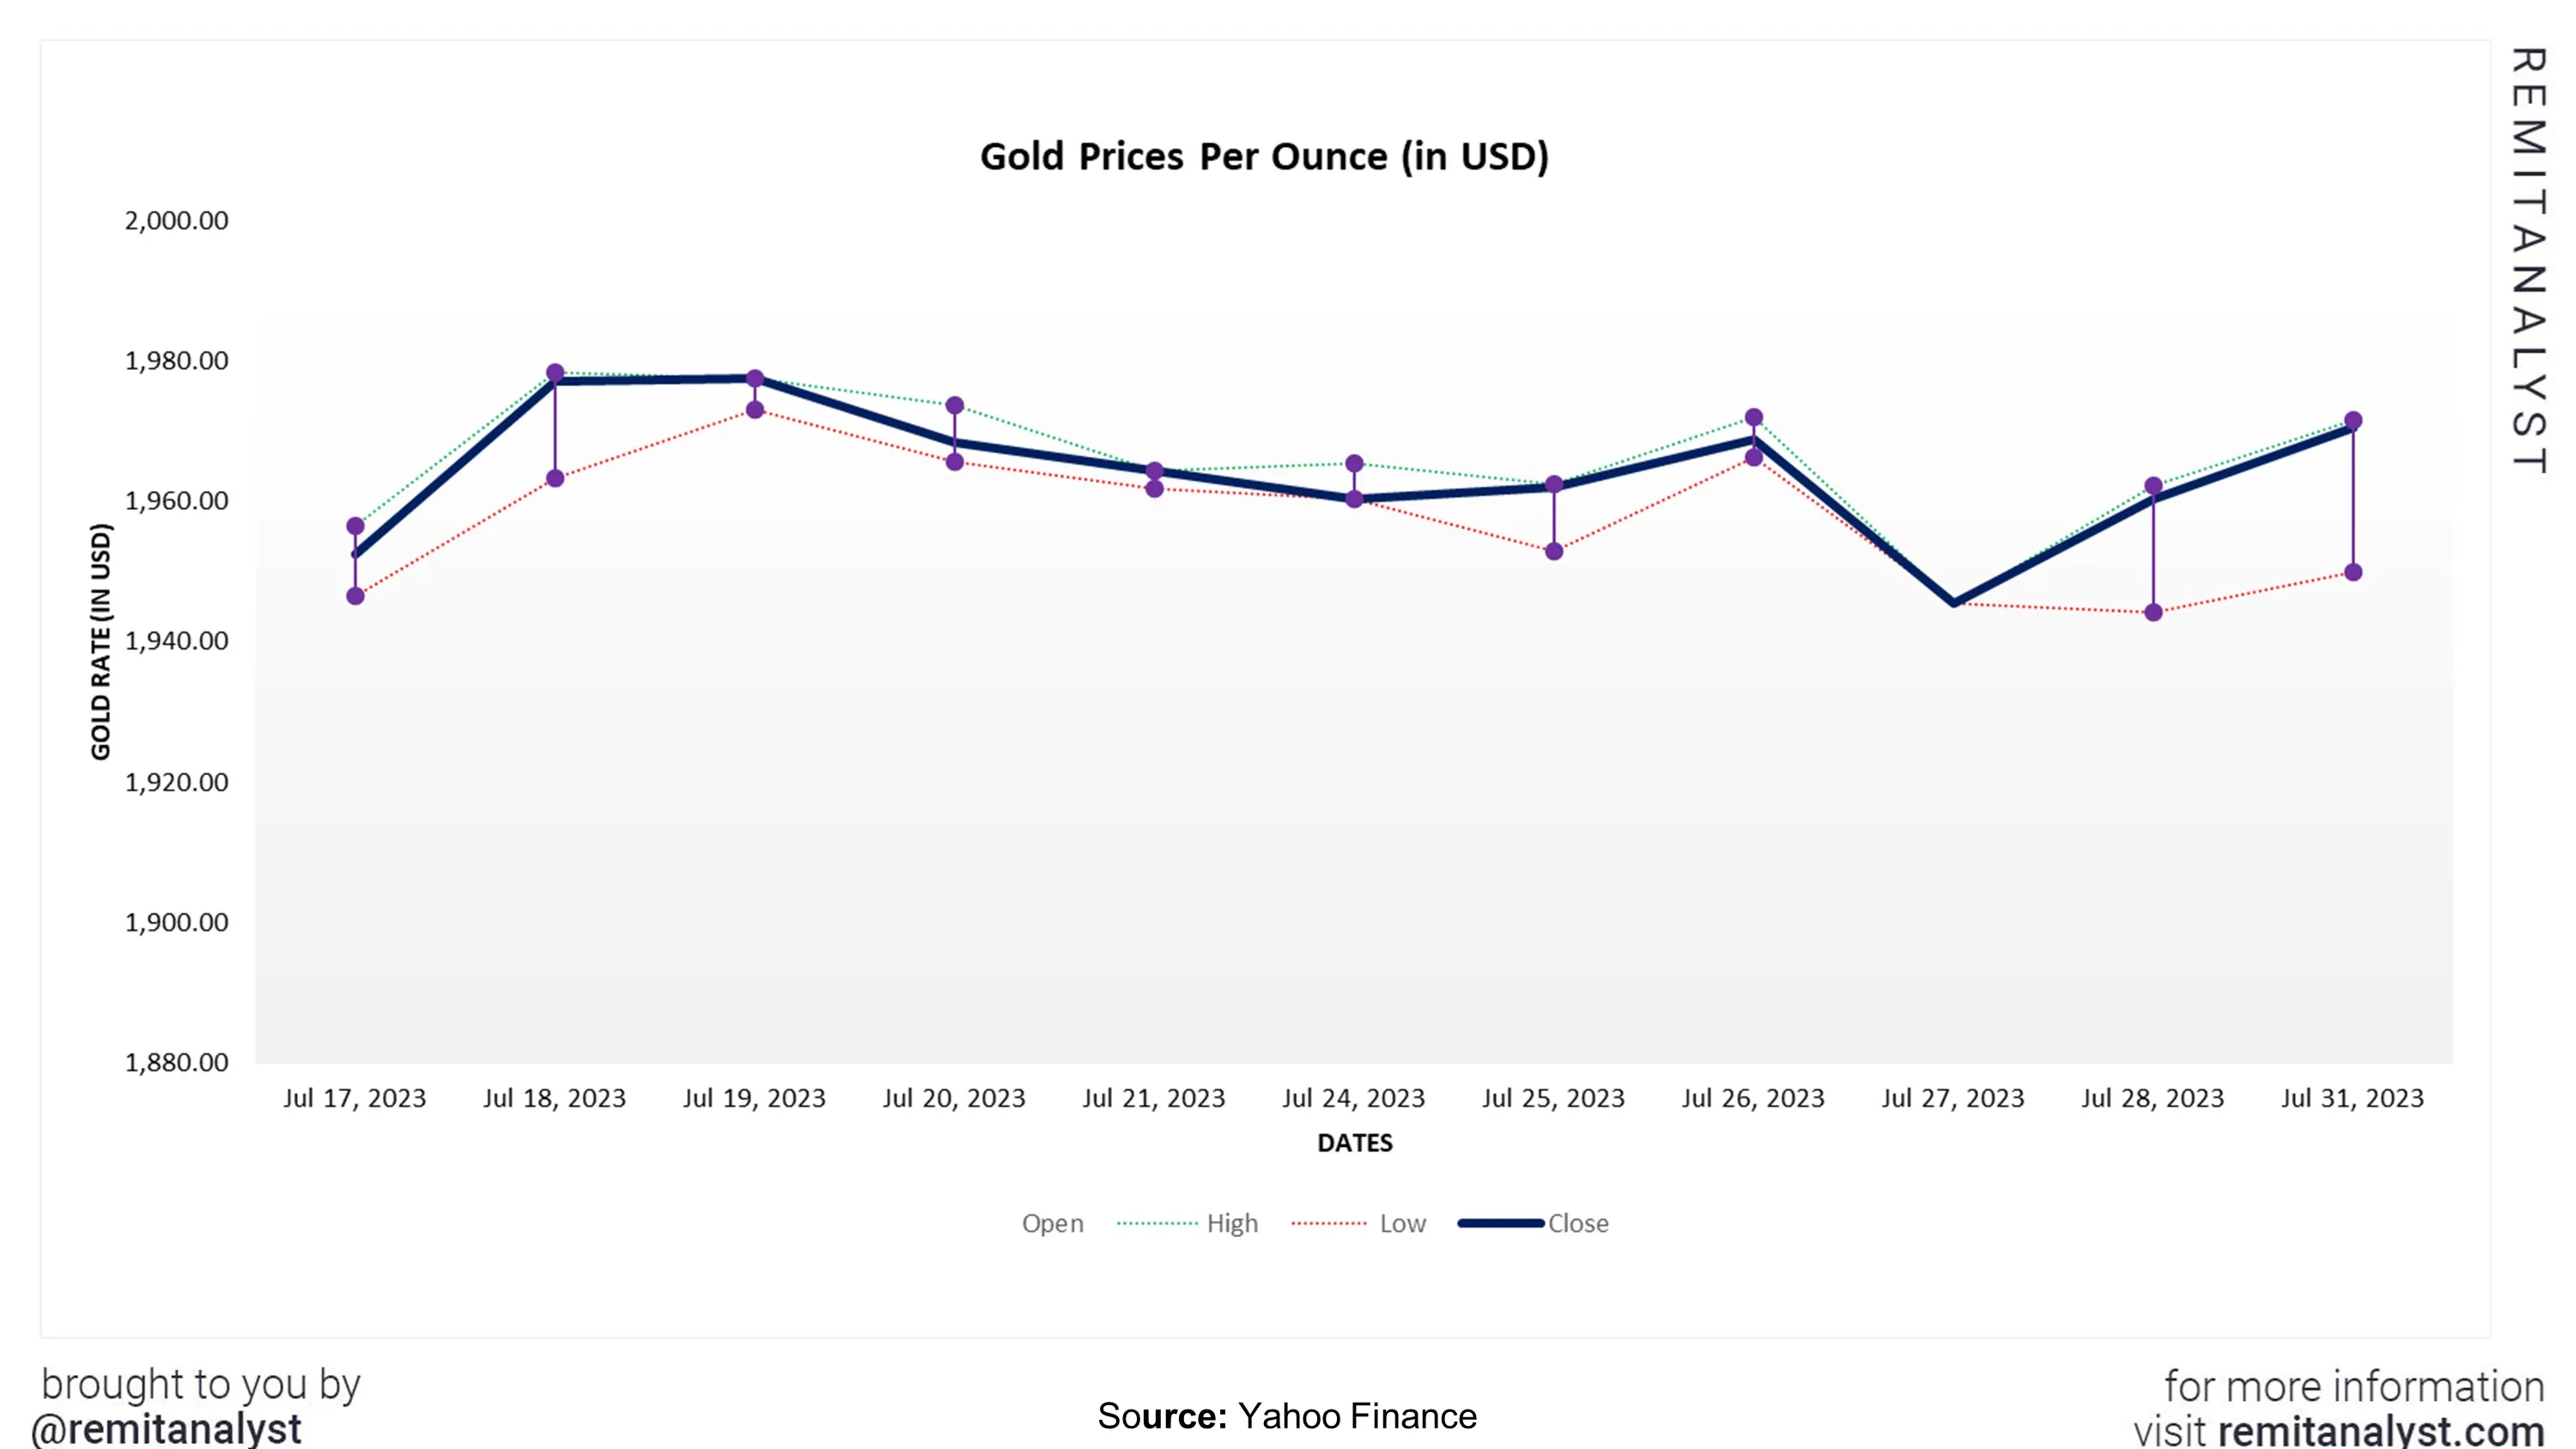 gold-prices-from-17-jul-2023-to-31-jul-2023